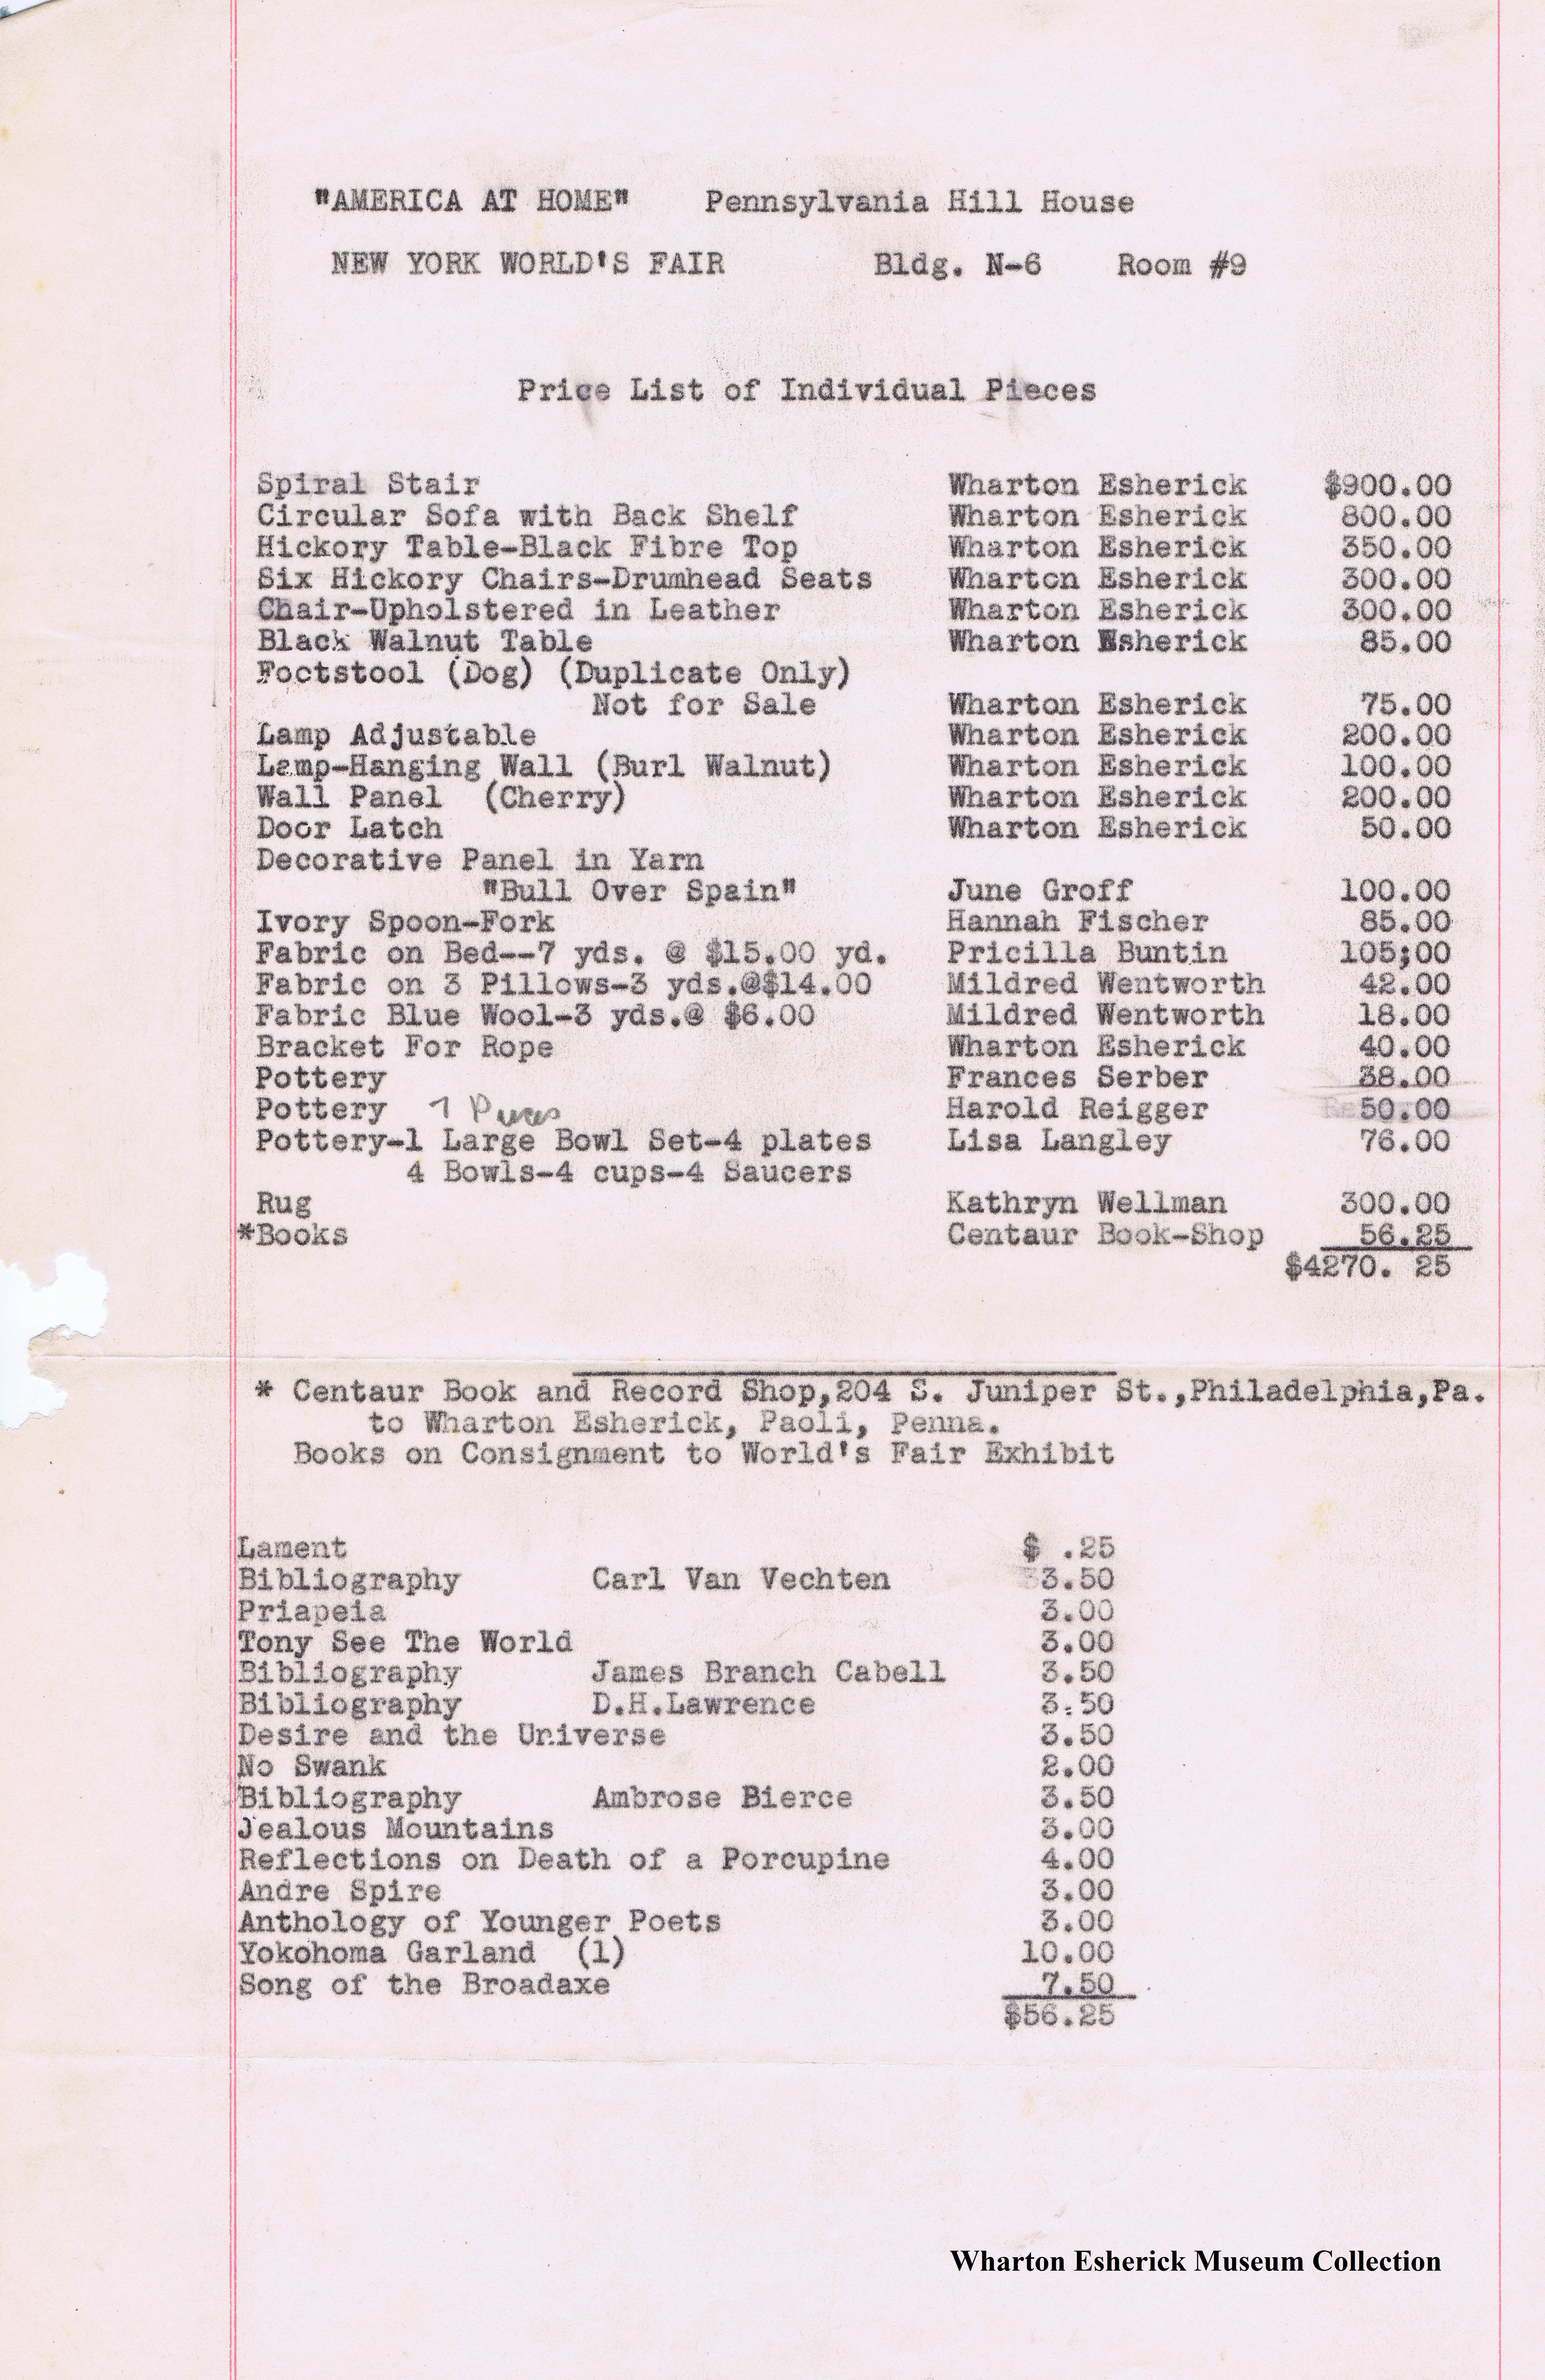 Price list for the "Pennsylvania Hill House".